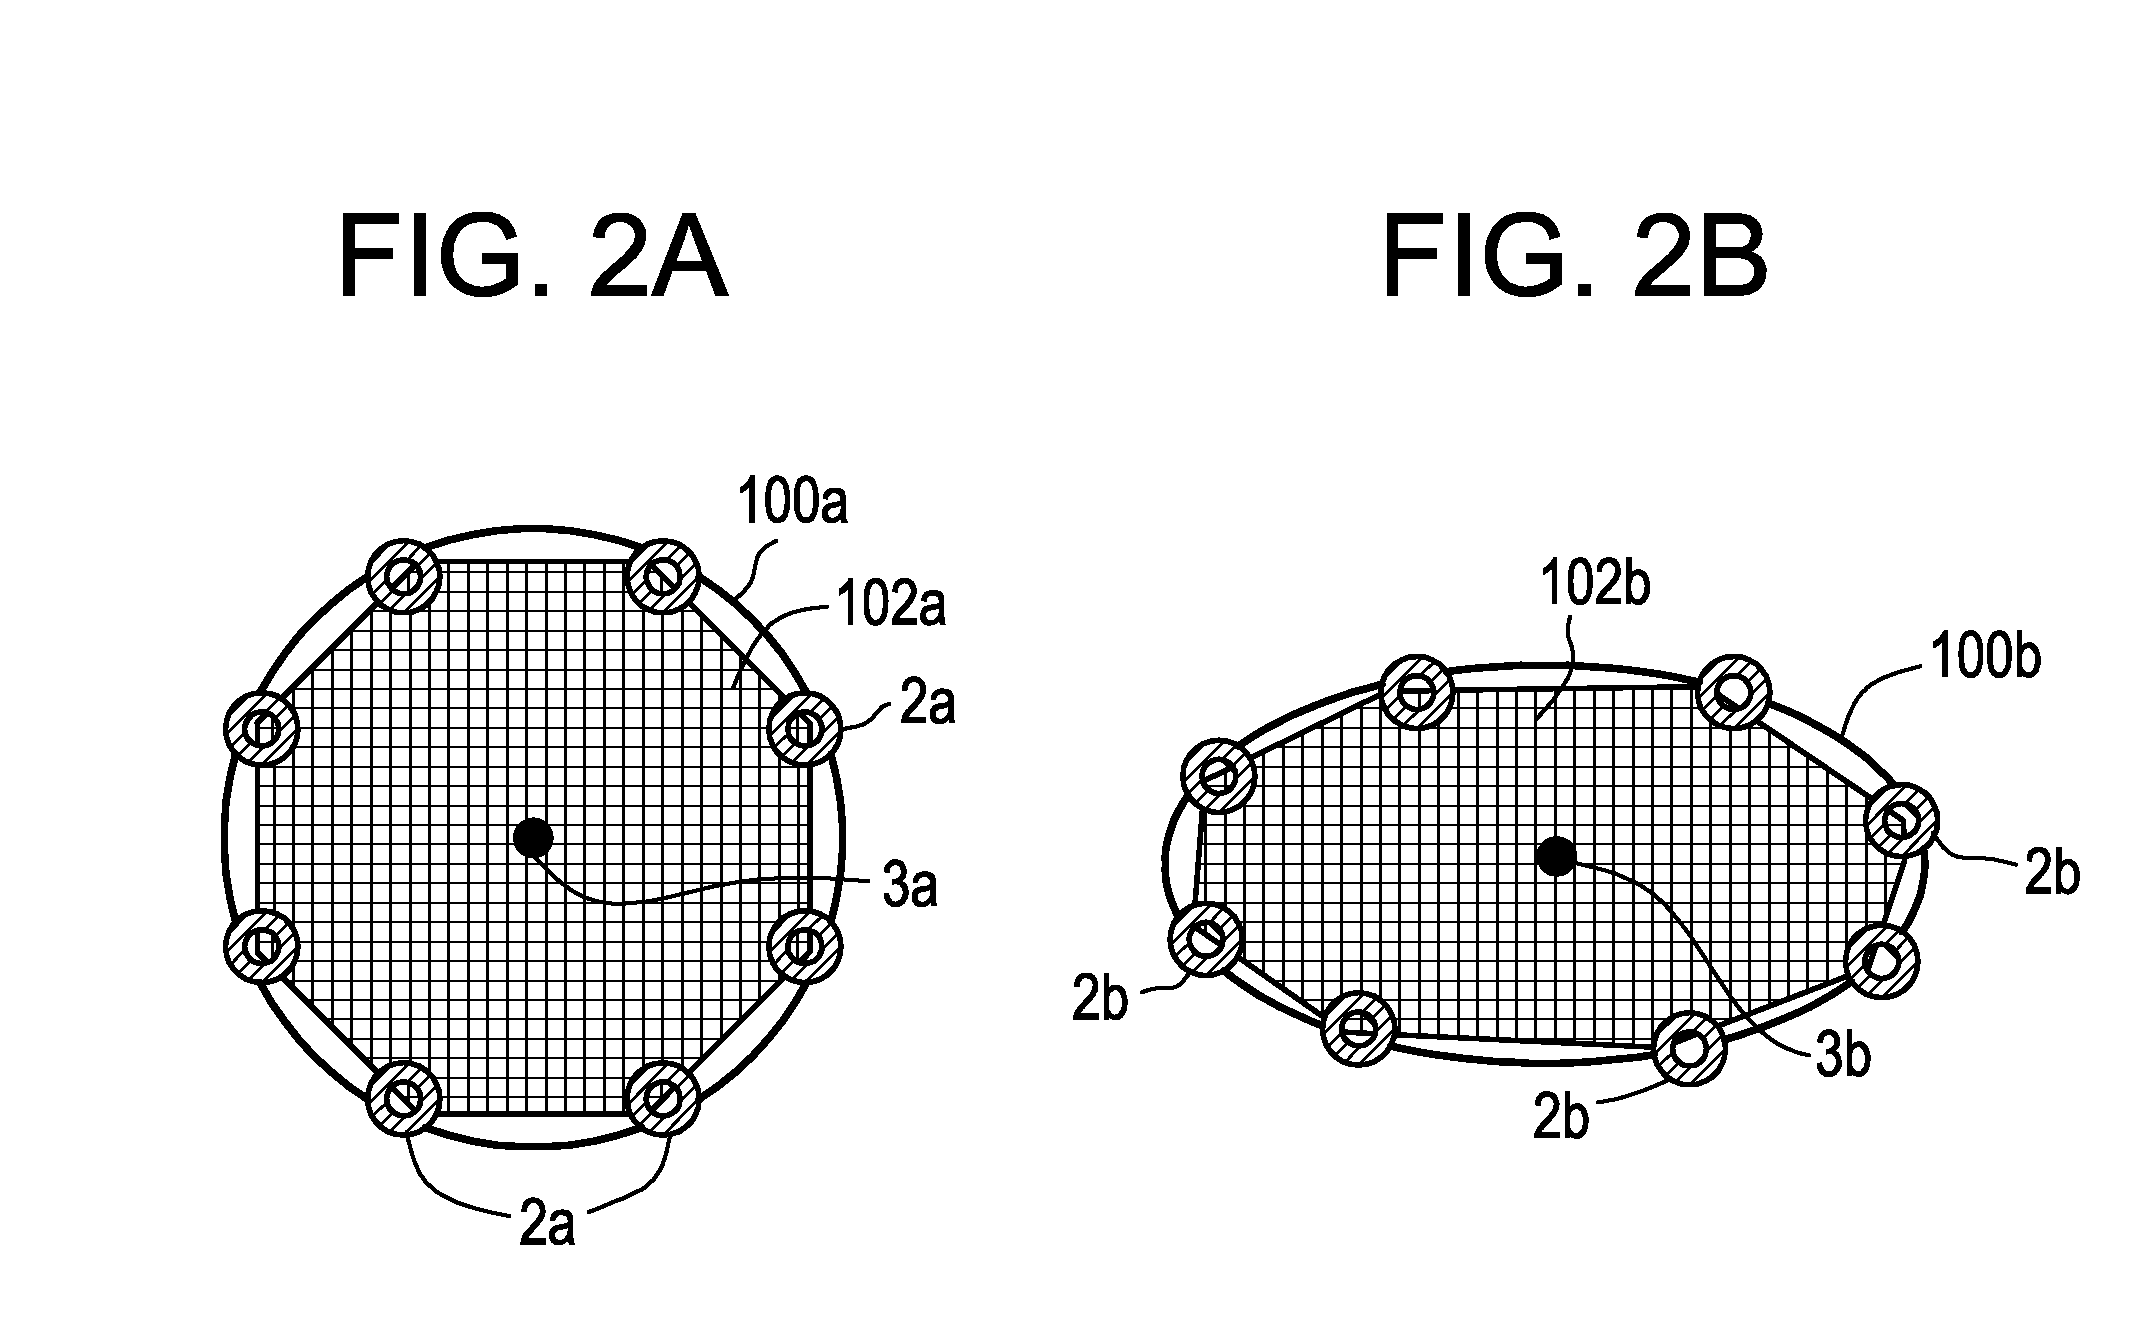 Distal Protection Filter with Improved Wall Apposition